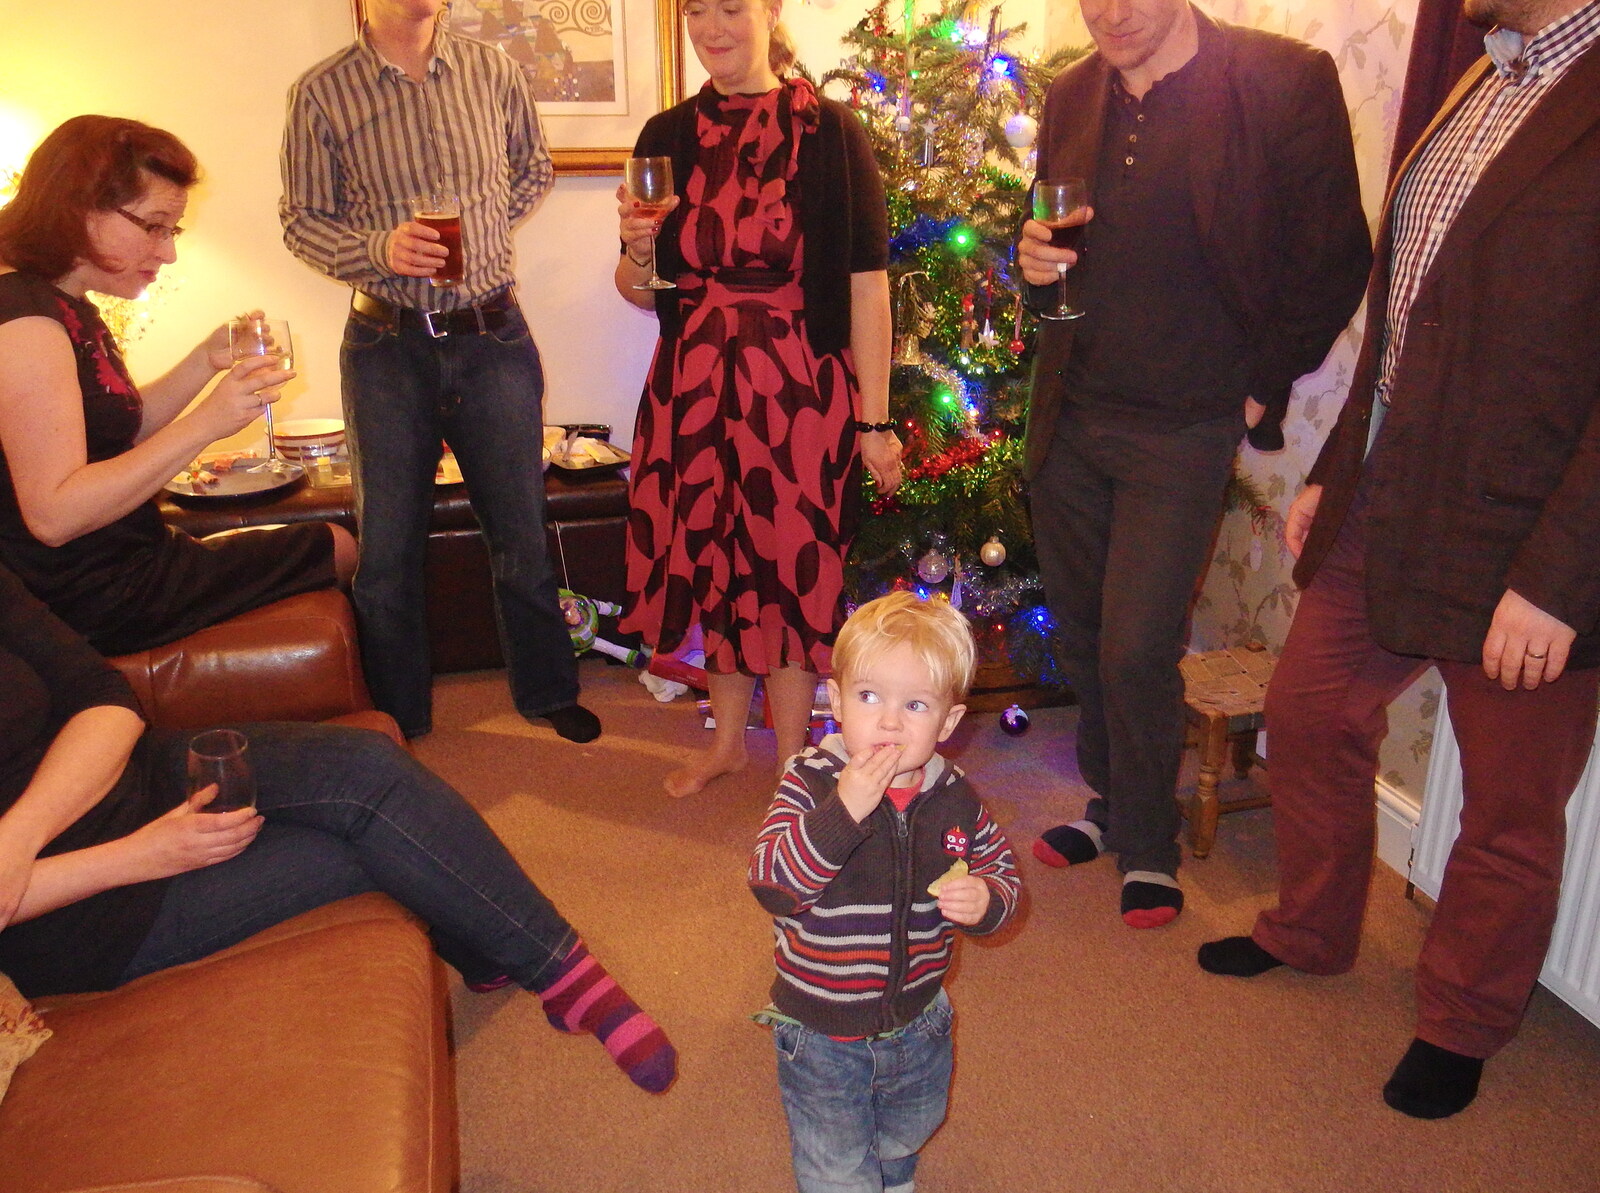 Gabes roams around amongst the big people from A Christmas Party, Brome, Suffolk - 21st December 2013